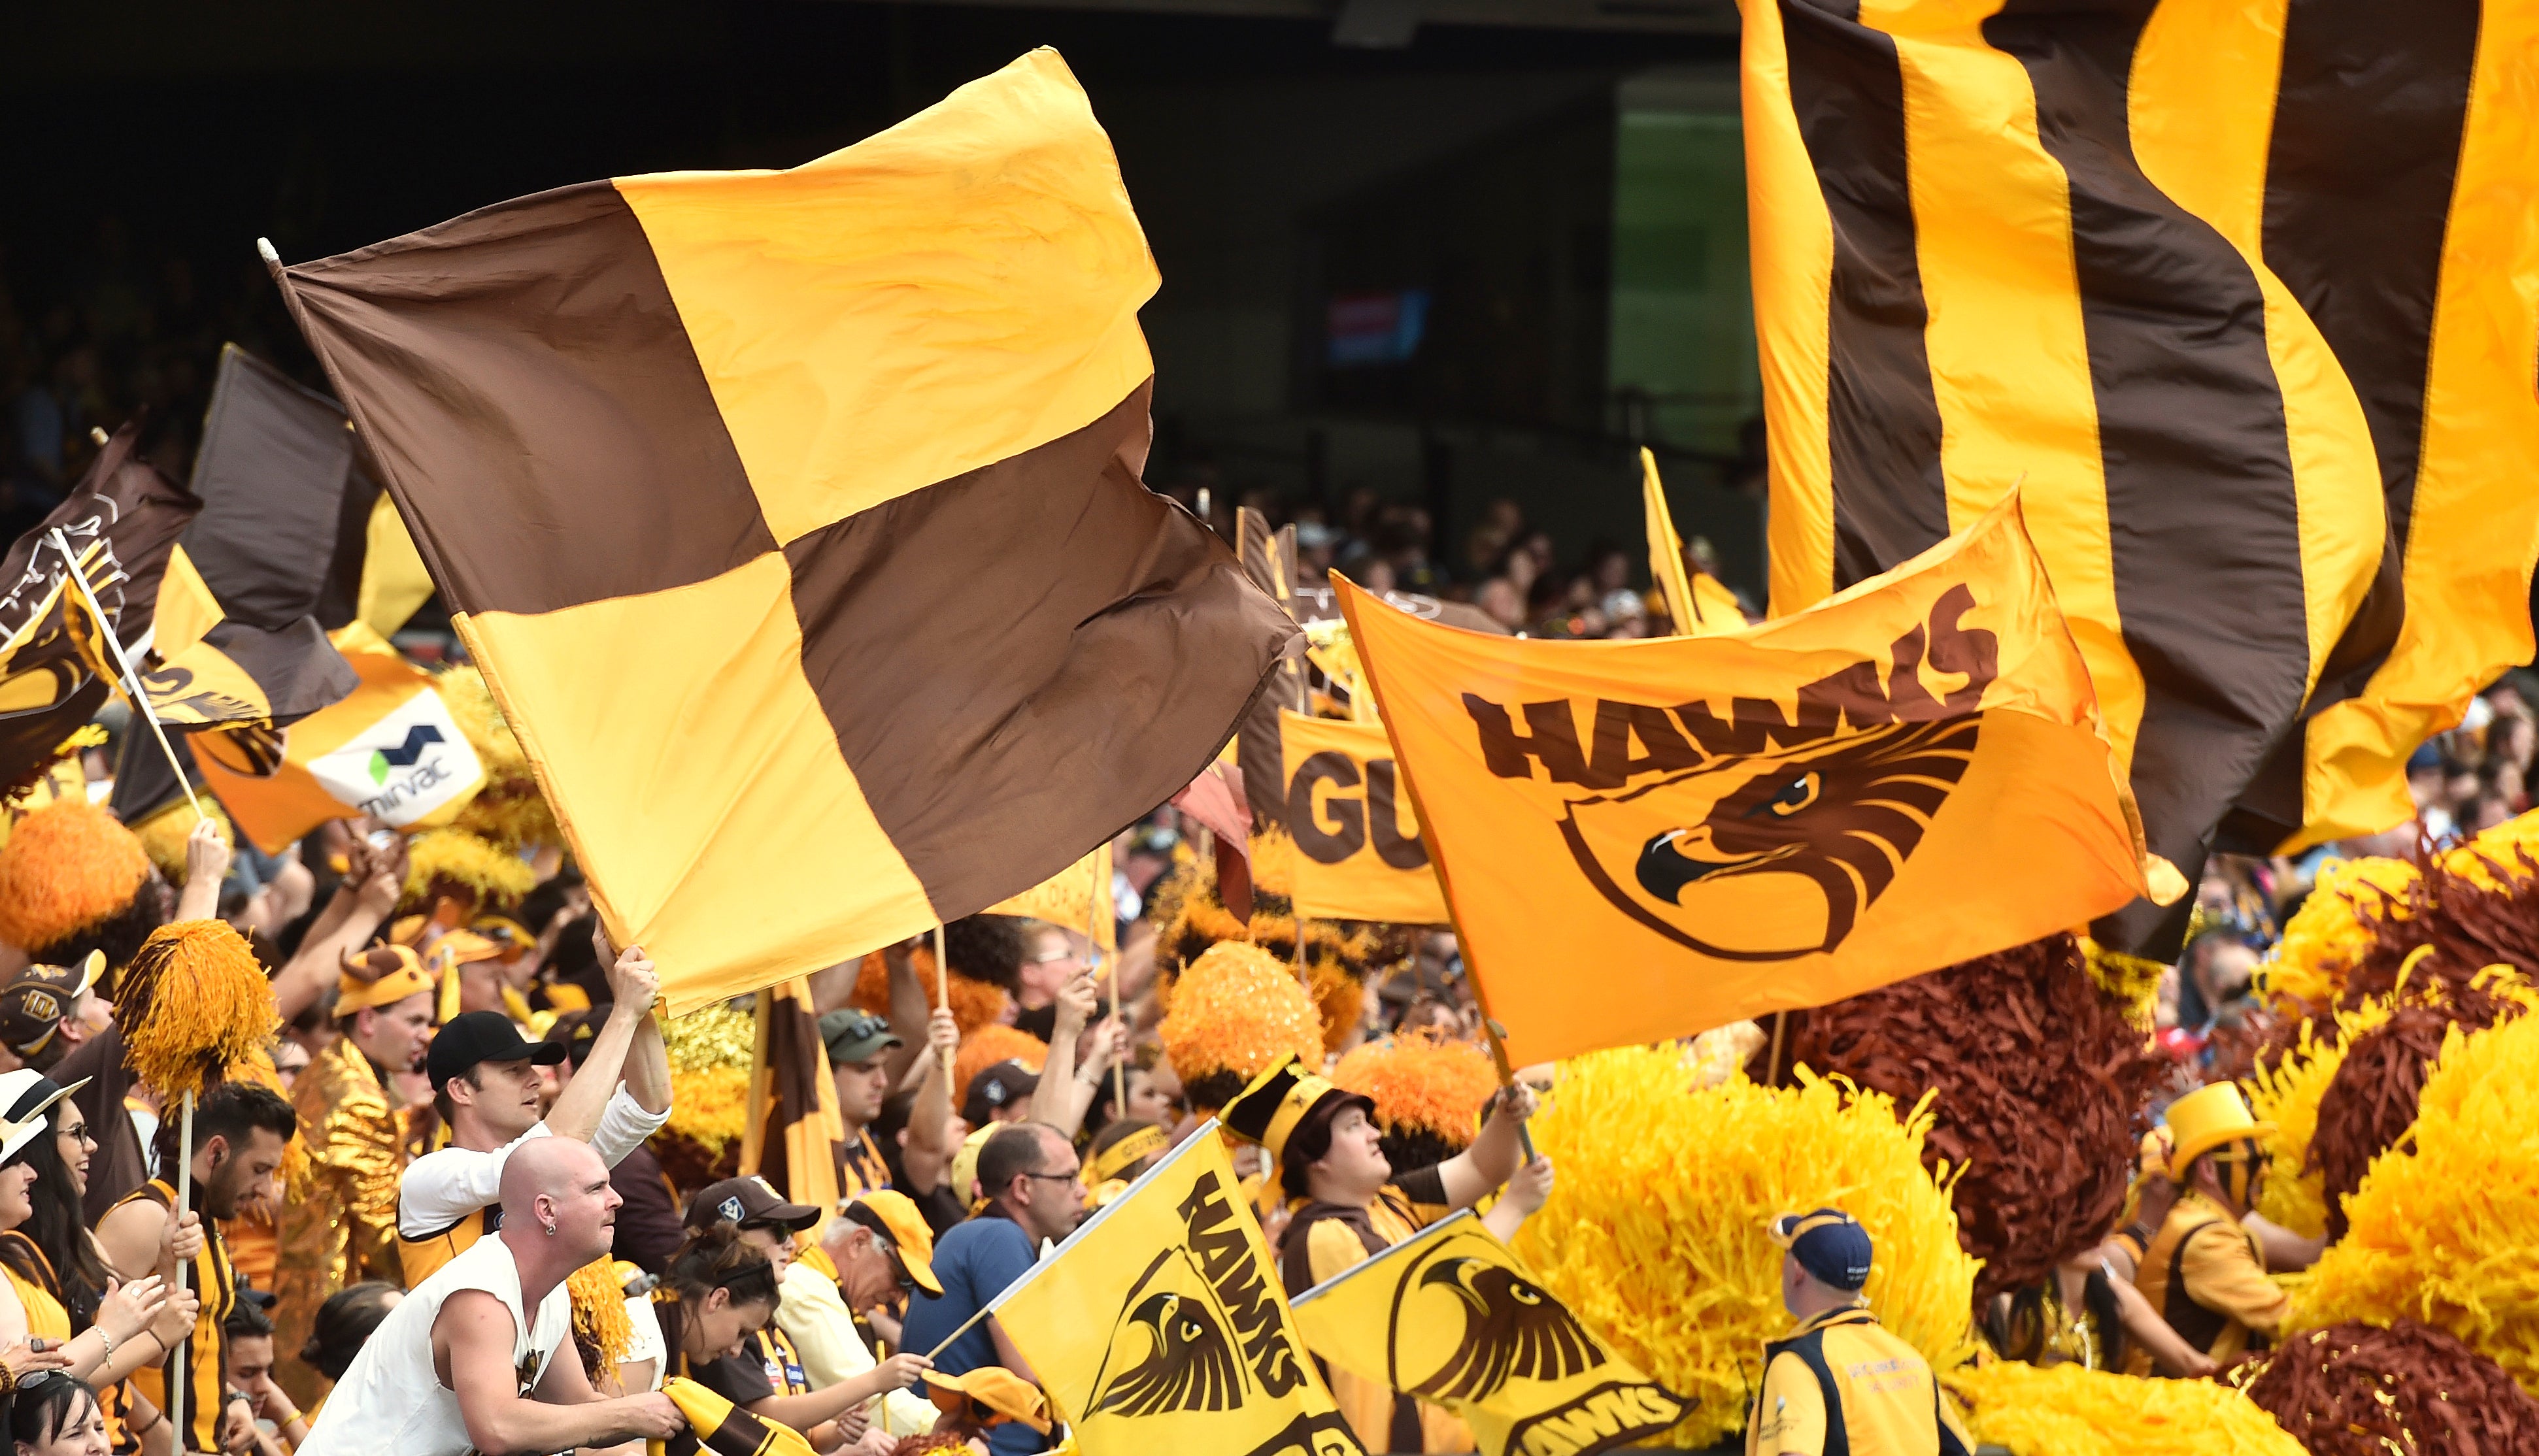 Hawthorn have been hit by ‘harrowing’ claims of bullying